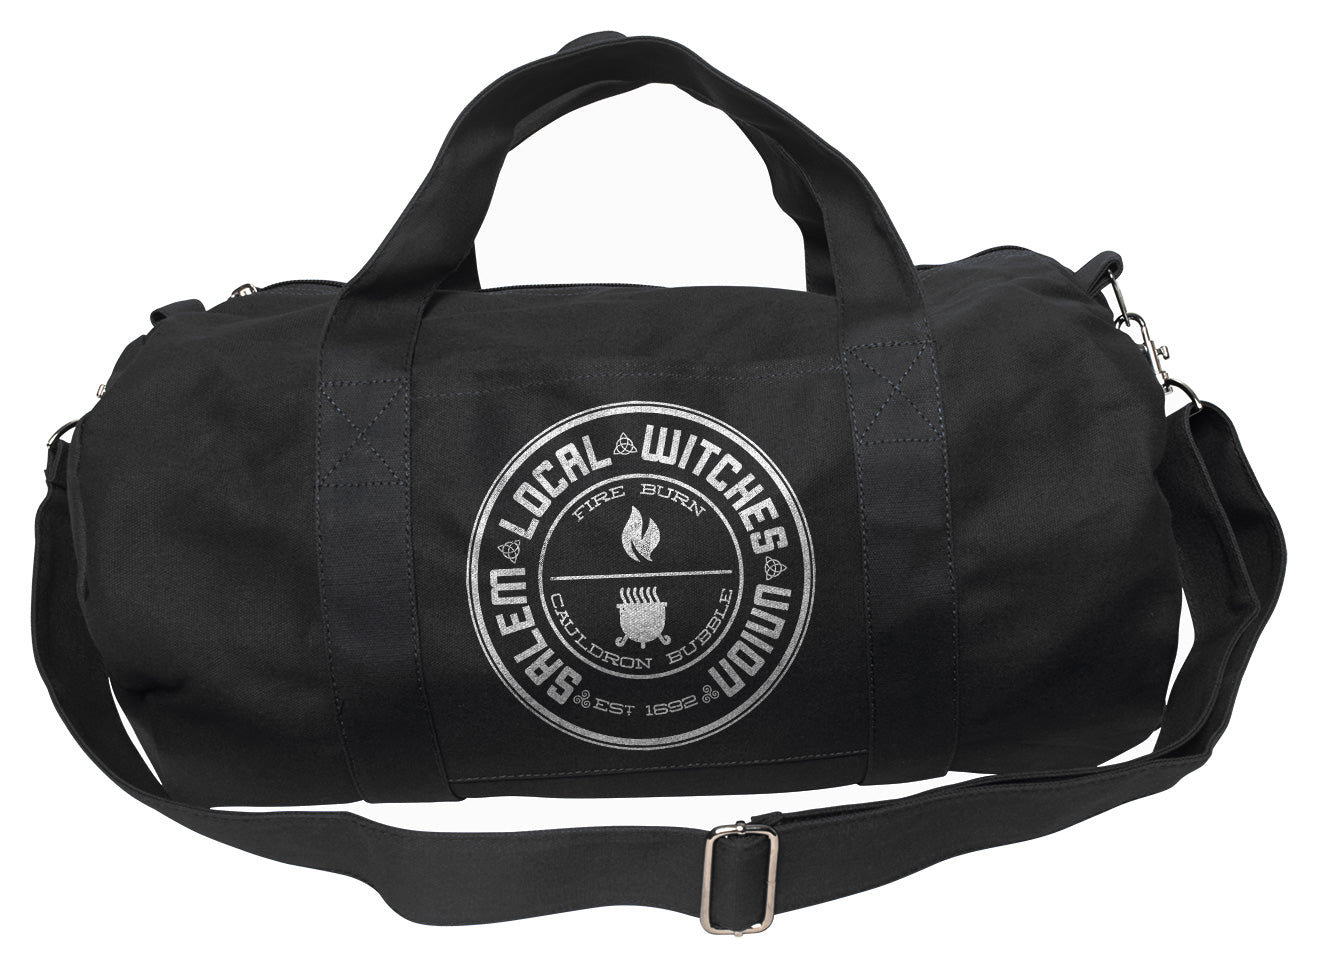 Salem Local Witches Union Duffel Bag